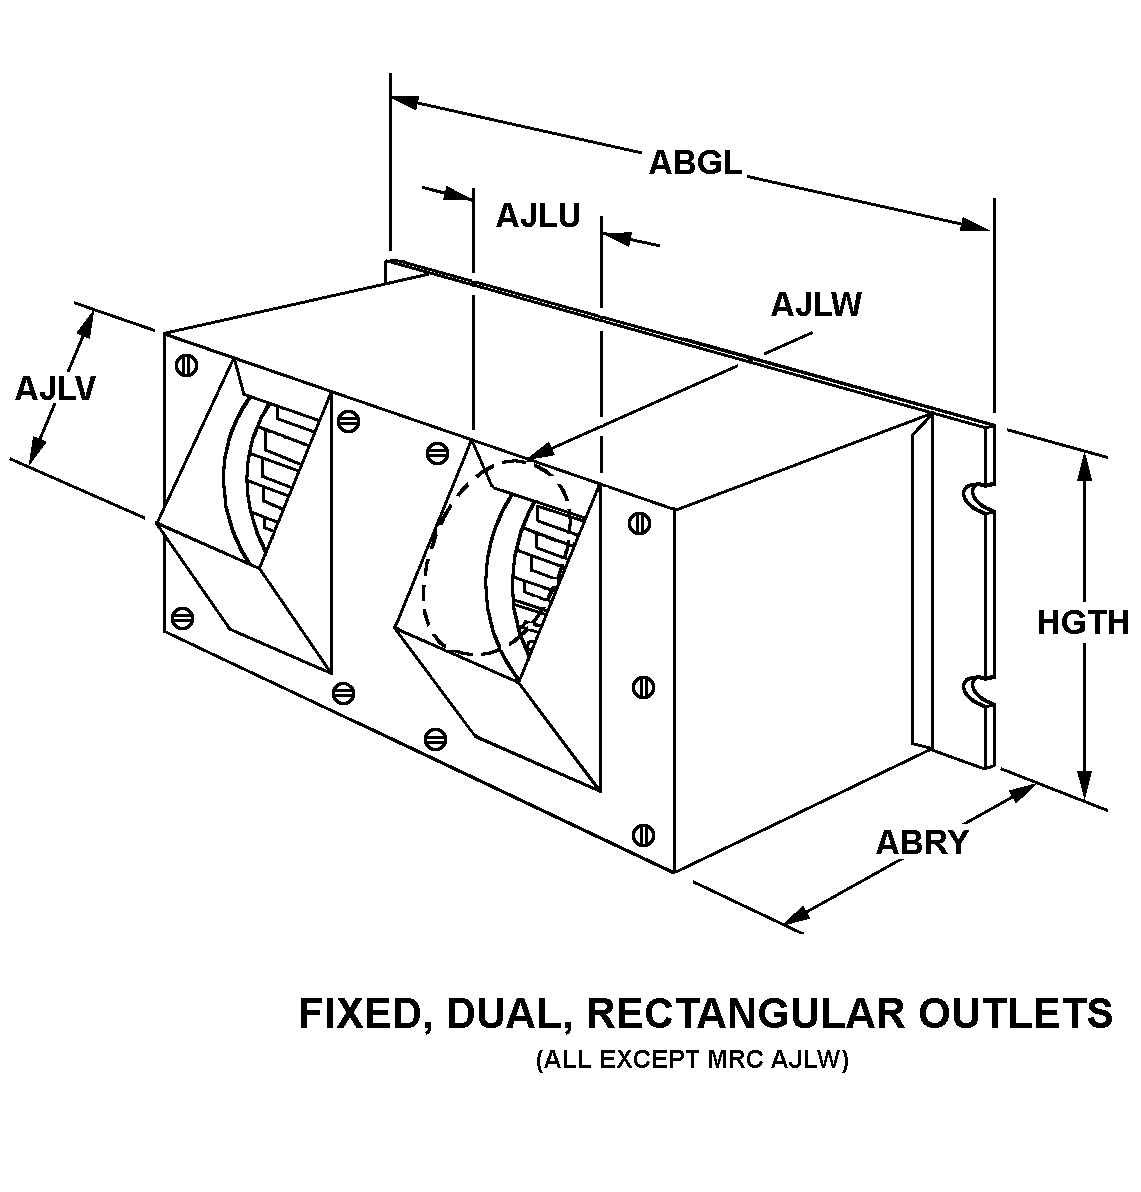 FIXED, DUAL, RECTANGULAR OUTLETS style nsn 4140-01-114-9096